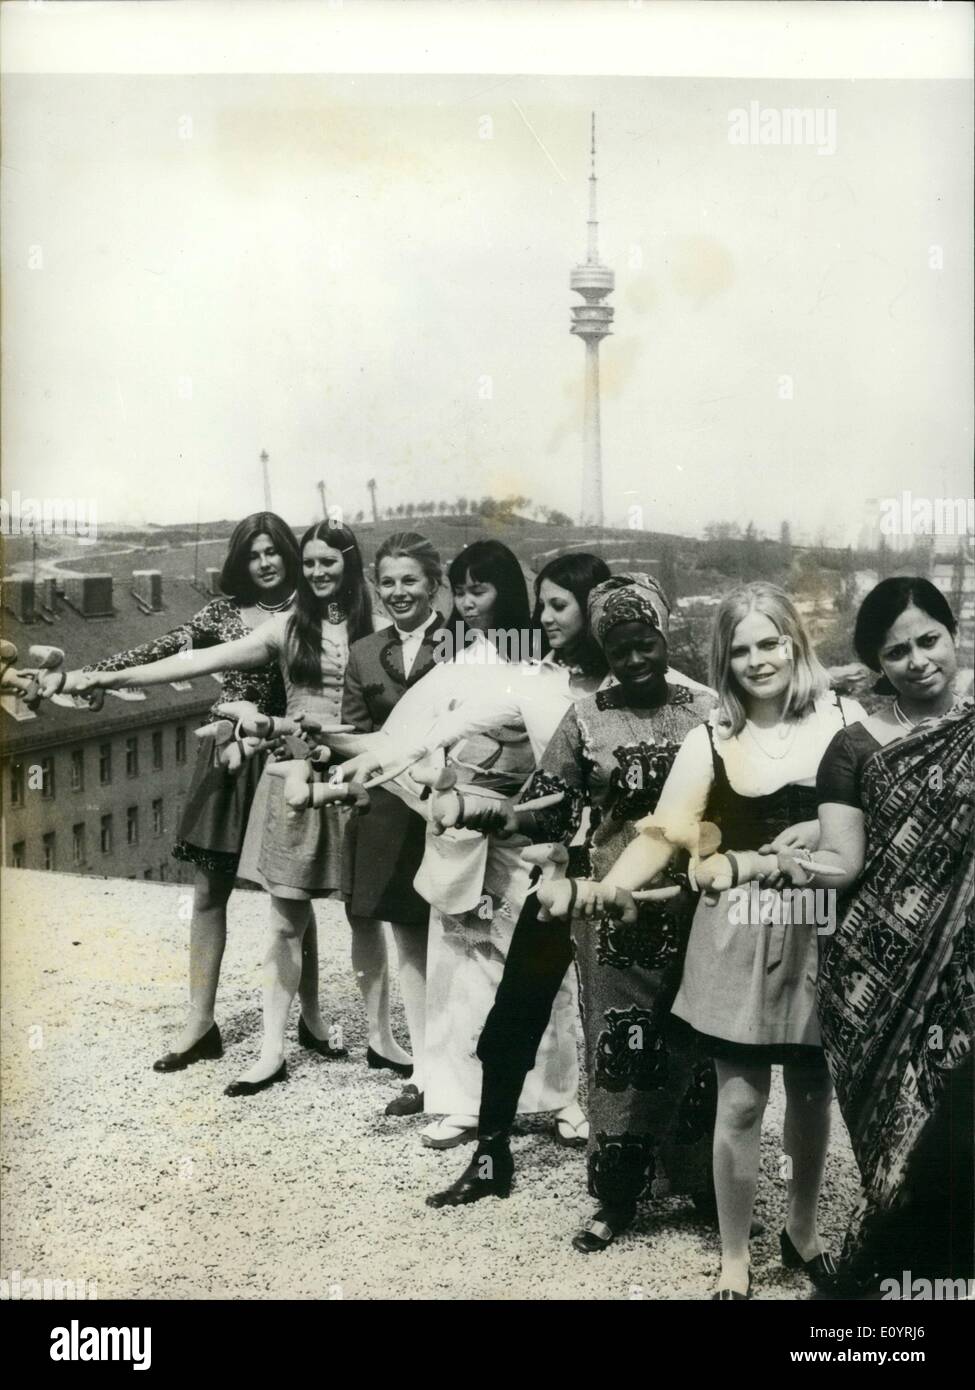 Apr. 04, 1971 - First Hostesses For The Munich Olympics. 1,500 hostesses are needed by the organisation committee for the Olympic Games 1972 in Munich (Germany). From 6,000 applications which had been sent from all parts of the world, more than 1,000 girls have already been chosen. 8 of them have already been introduced as first hostesses for the Olympiad. Photo Shows:- (L to R): Ingeborg Gruner (Germany); Renate Schutz (Germany); Helga Hasshoff (Germany); Atsuku Diemann (Japan); Neysa Erickssen-Pereira (Brazil); Joyce Darko (Ghana); Hella Rabbethge (German) and Ravibala Shenoy (India) Stock Photo